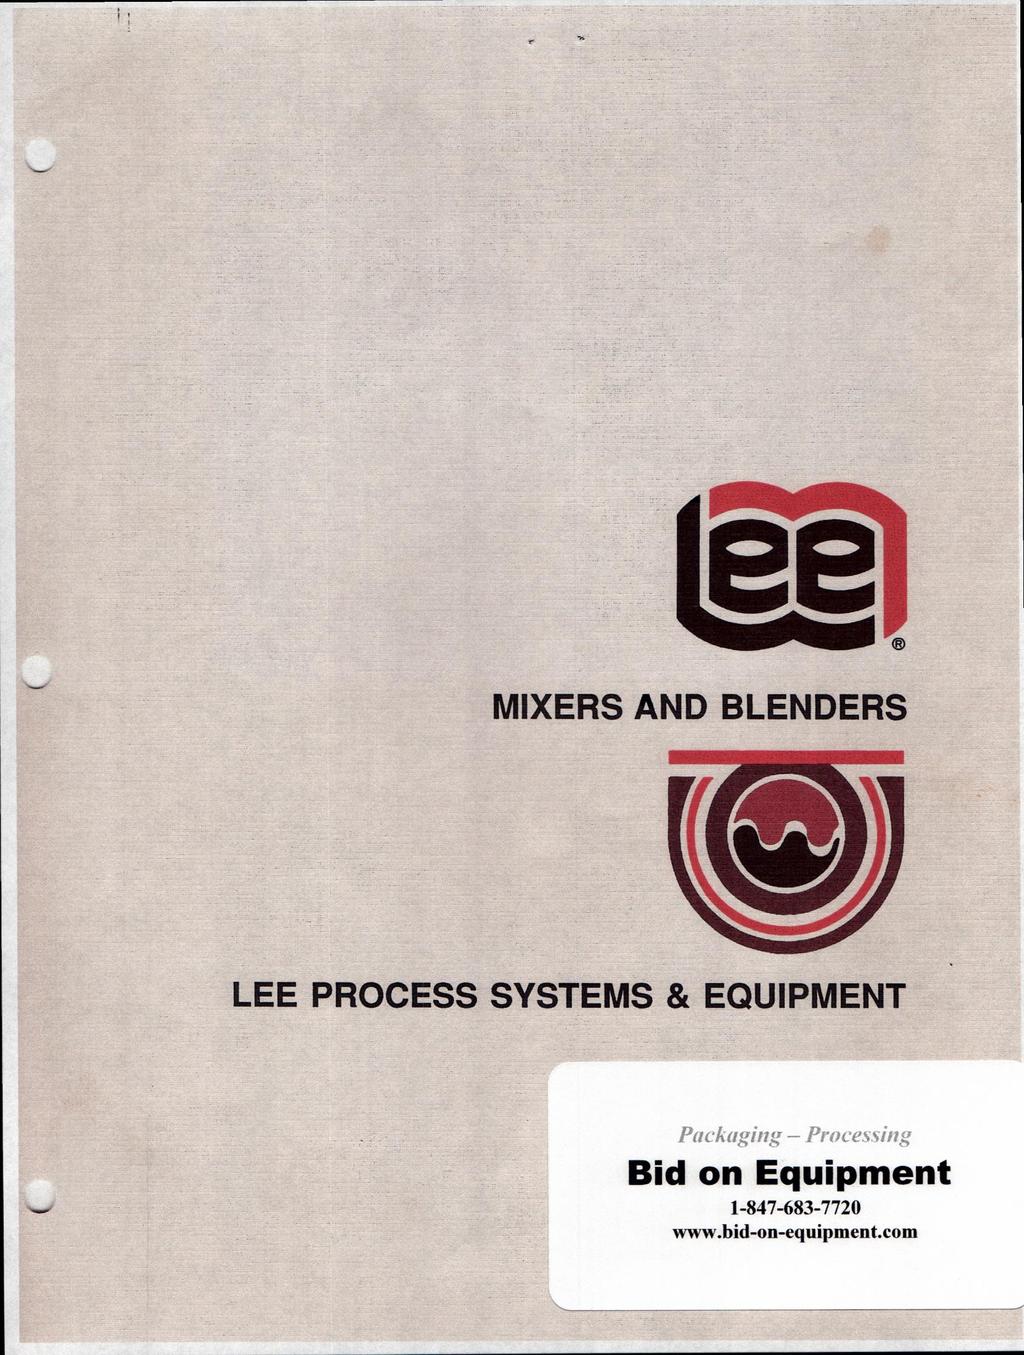 MIXERS AND BLENDERS LEE PROCESS